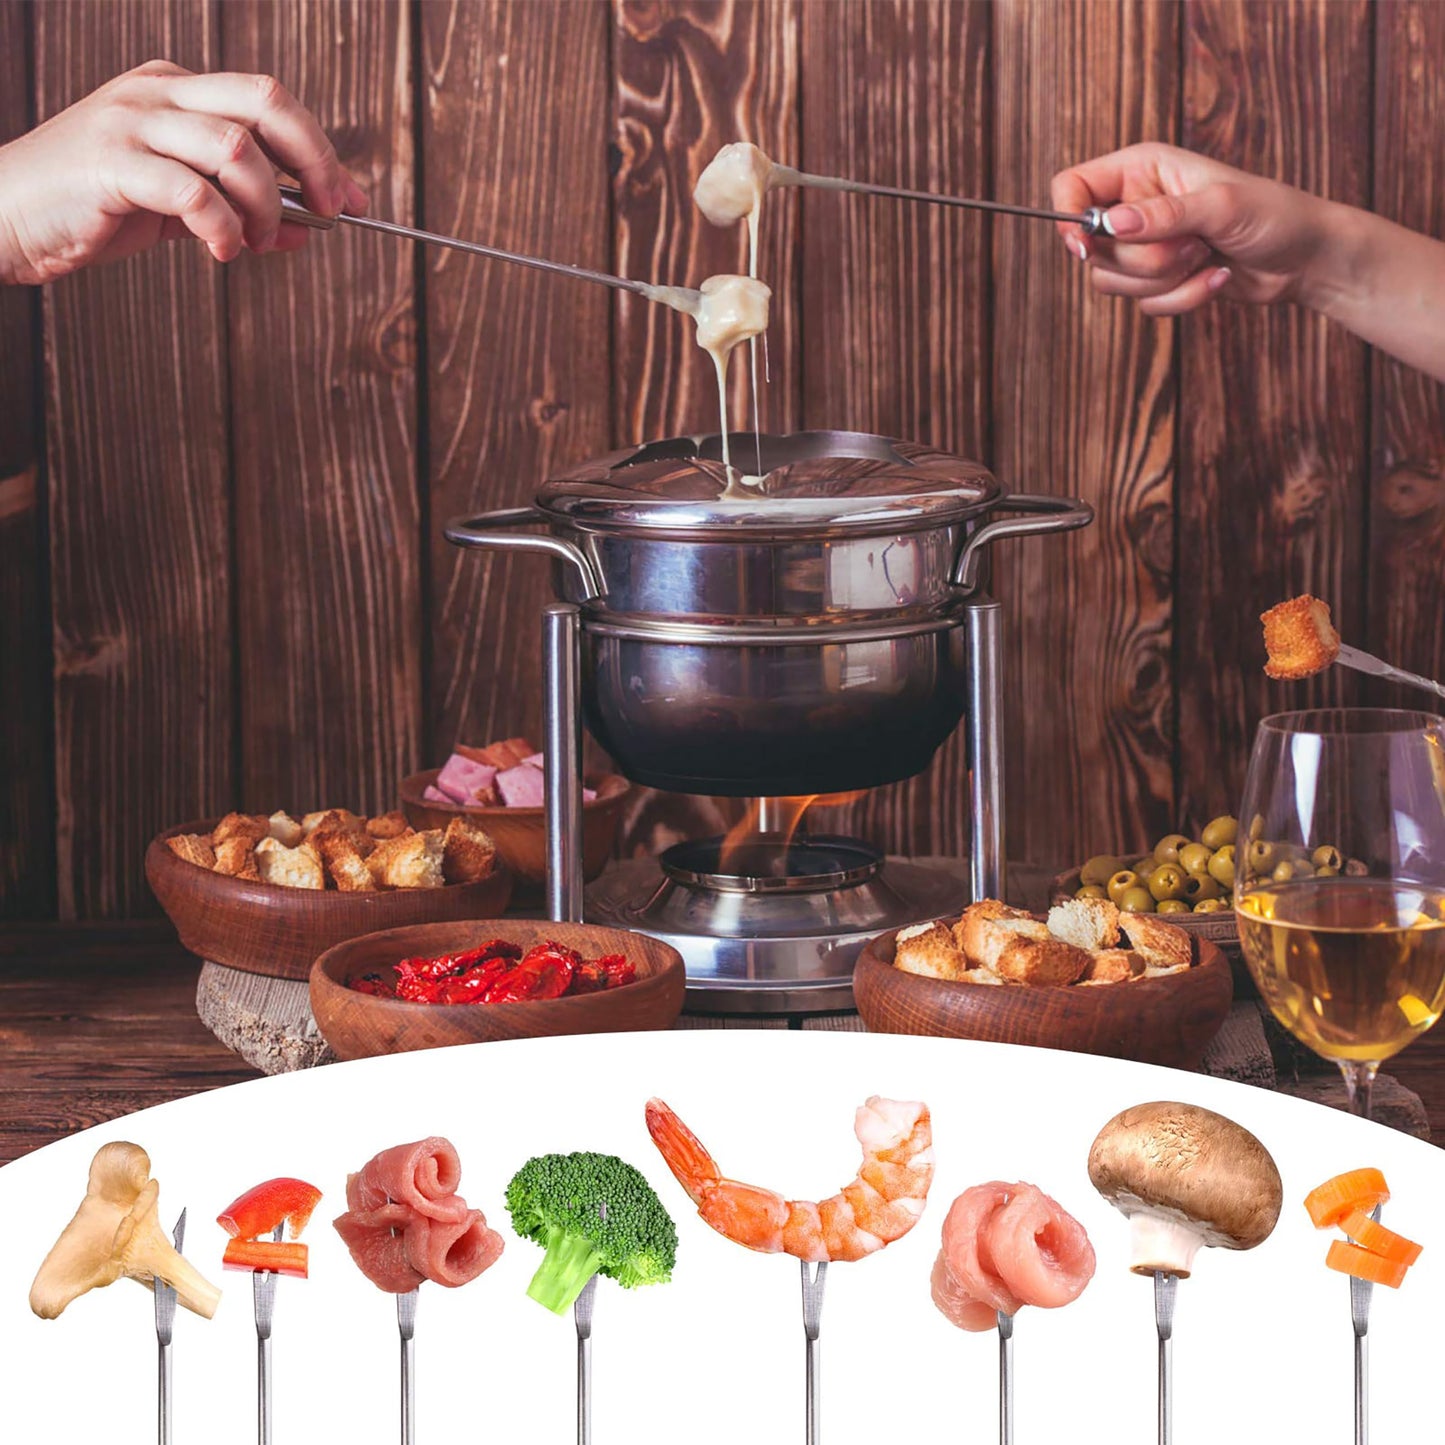 15pcs 9.6 Inch Fondue Sticks, Smores Sticks, Stainless Steel Fondue Forks with Heat Resistant Handle for Roast Meat Chocolate Dessert Cheese Marshmallows